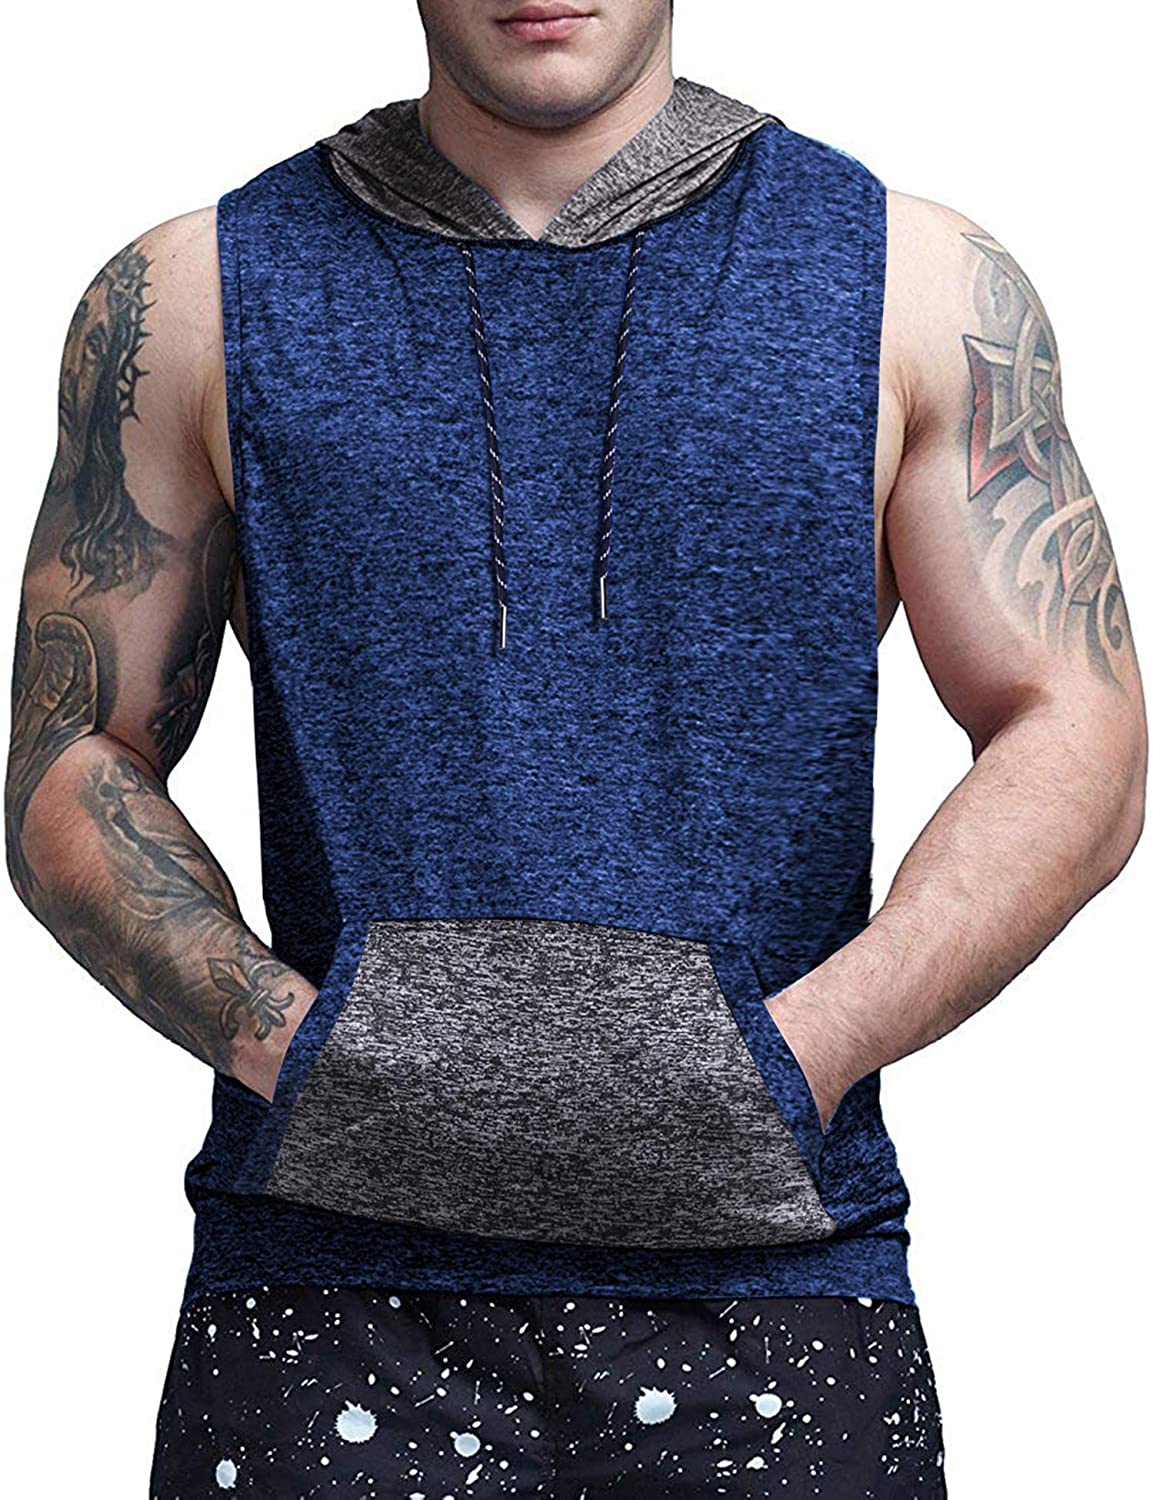 COOFANDY Mens Workout Hooded Tank Top Gym Muscle Cut Off Short Sleeves T Shirt 